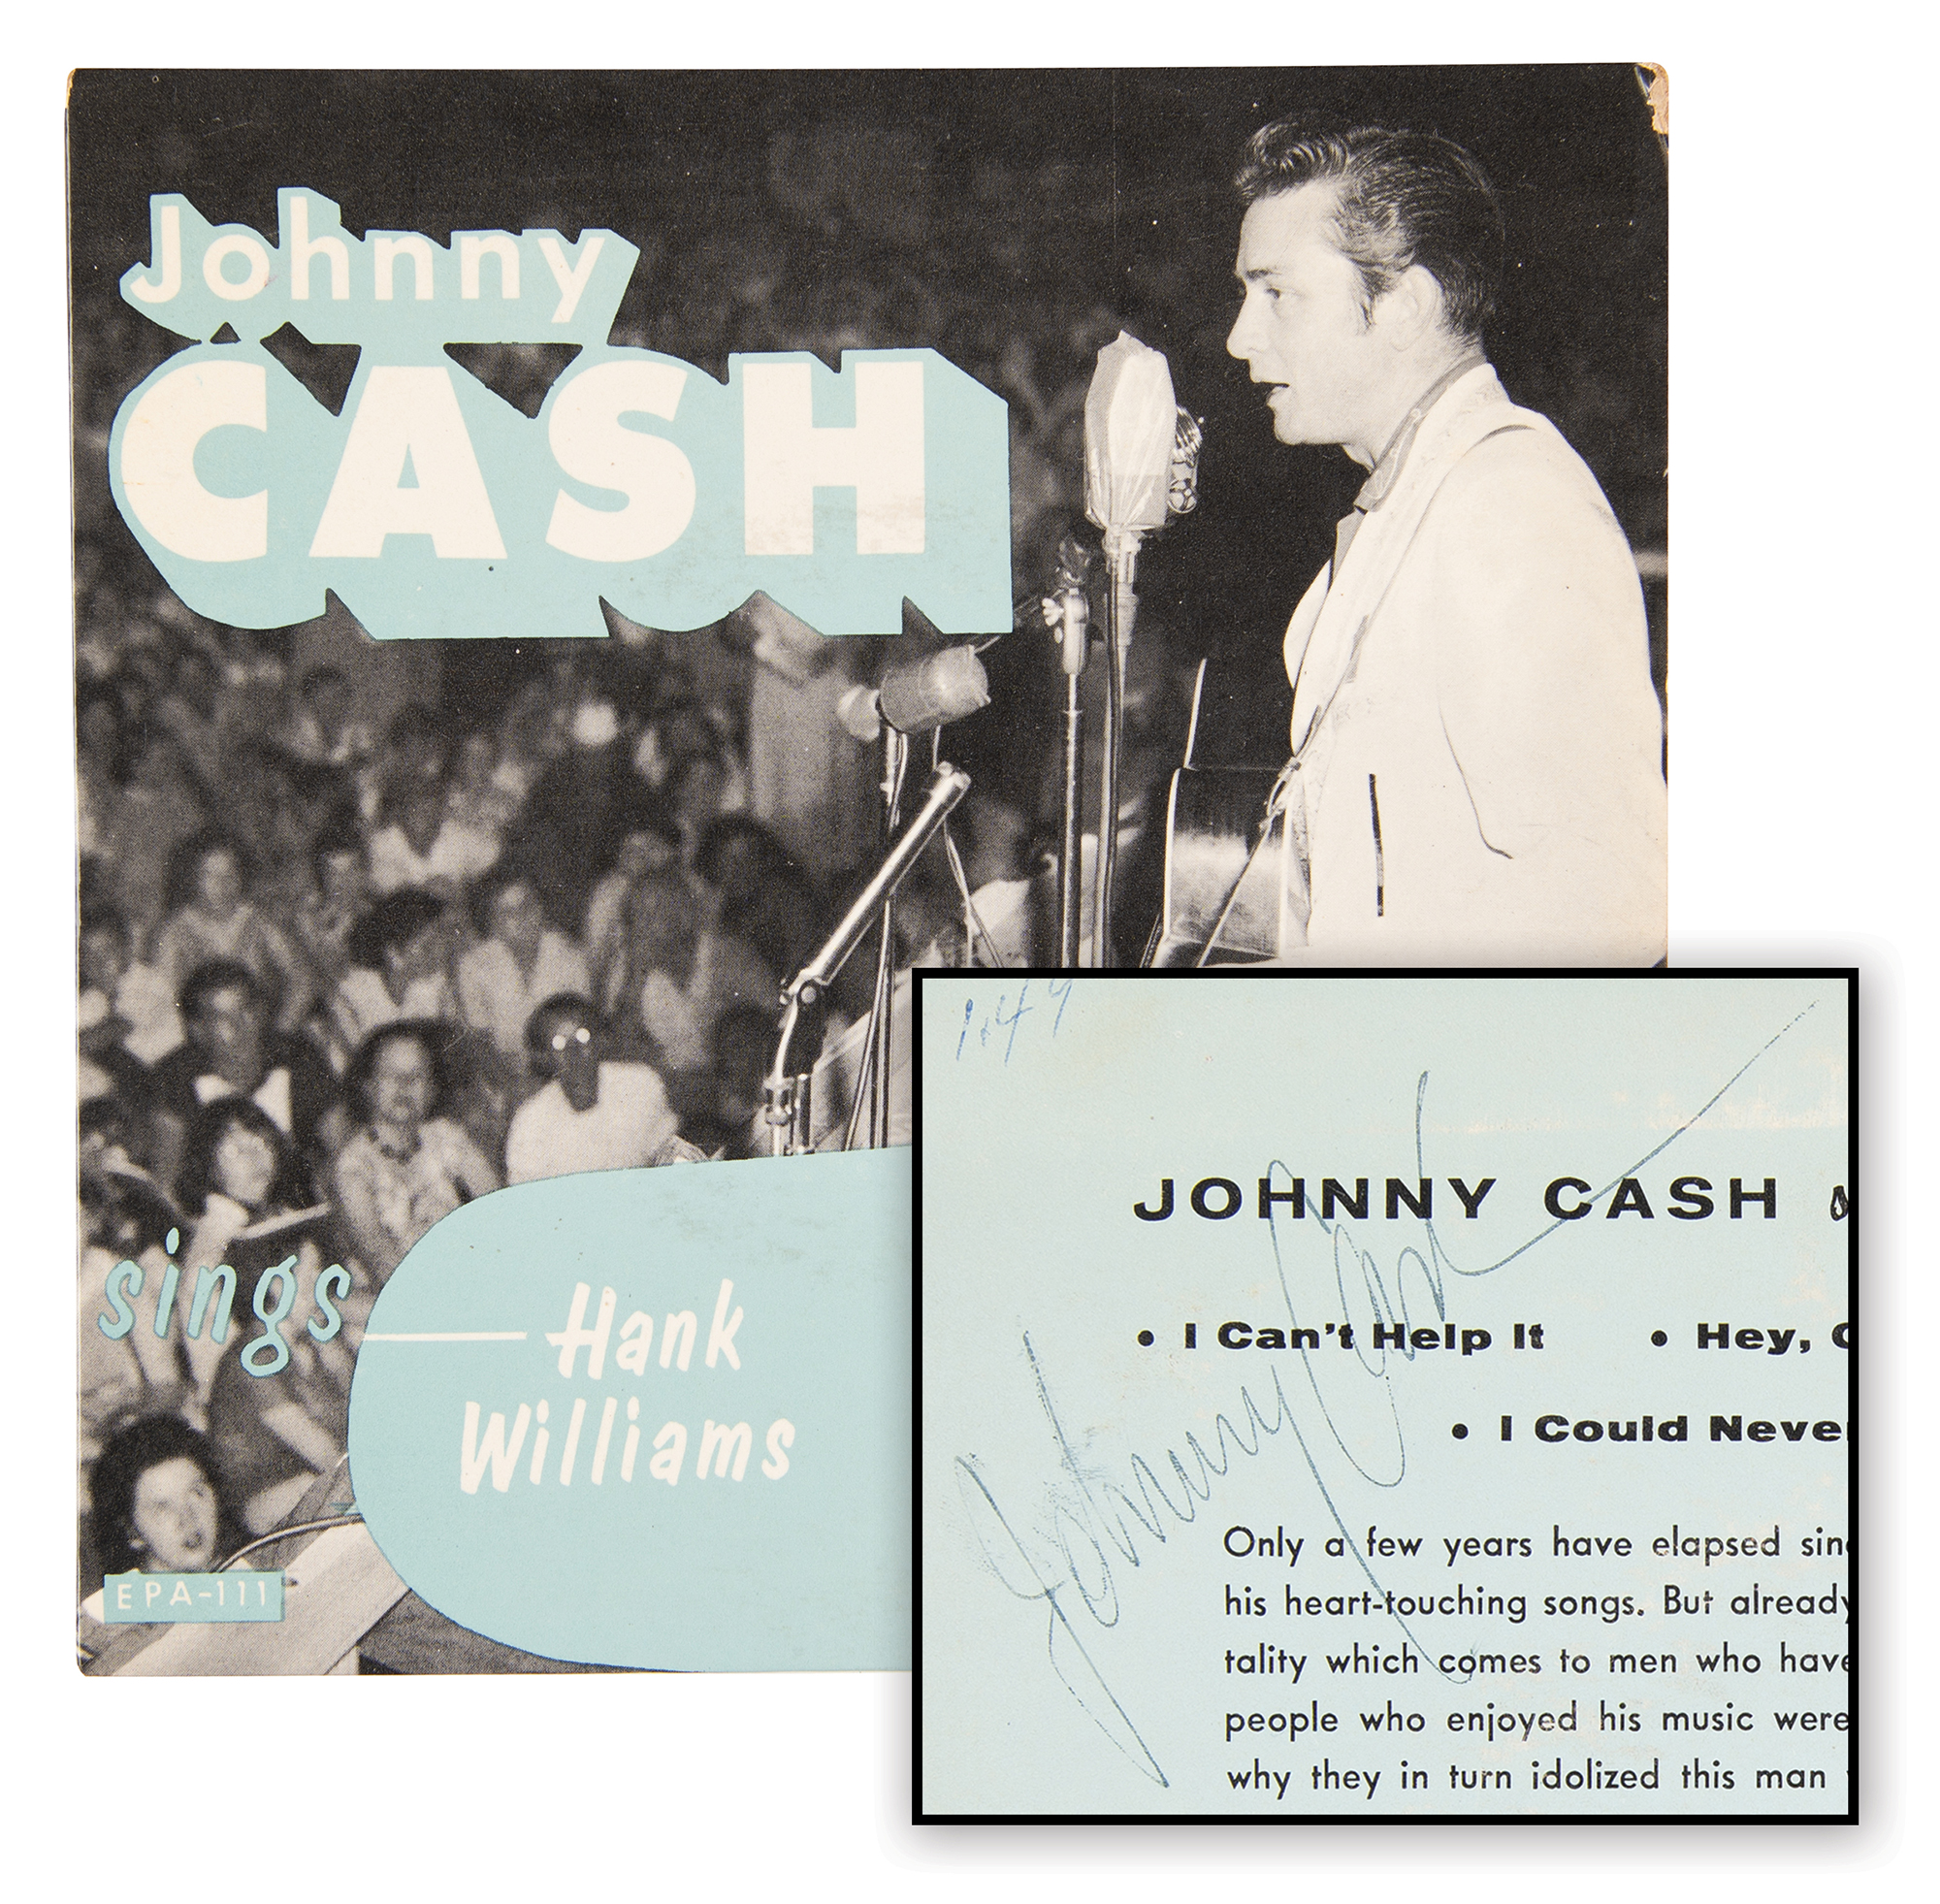 Lot #9129 Johnny Cash Signed 45 RPM Record - 'Johnny Cash Sings Hank Williams' (Sun Records) - Image 1